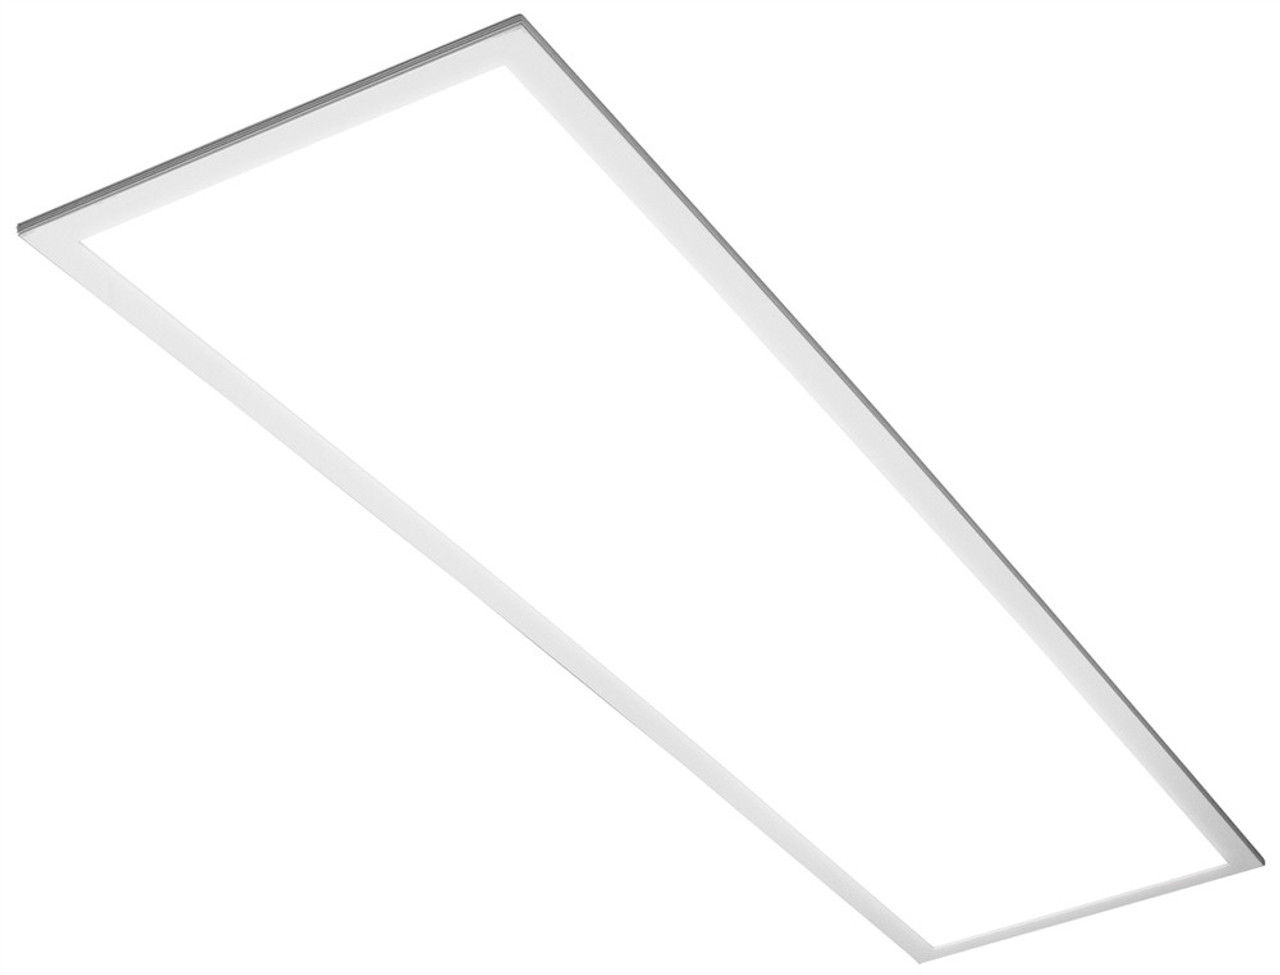 LED Suspended 1x4 Panel Color Selectable 35K/4K/5K - Dimmable - With  Suspension Mount Kit